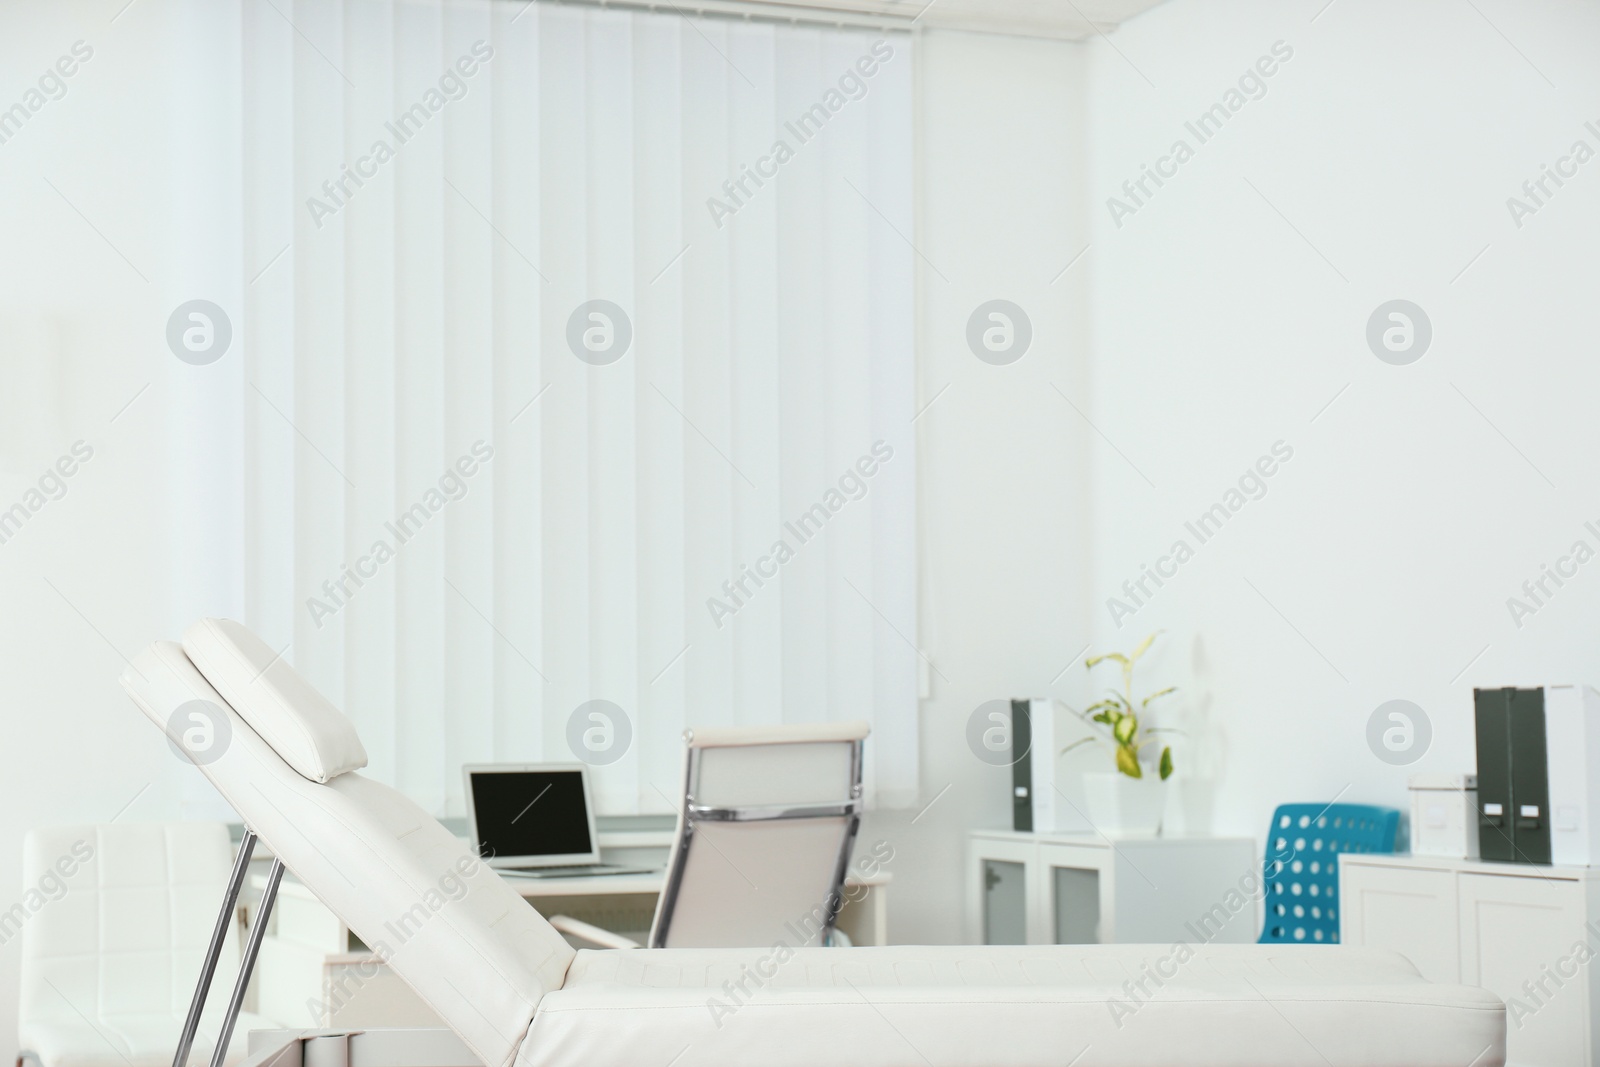 Photo of Modern medical examination couch in doctor's office